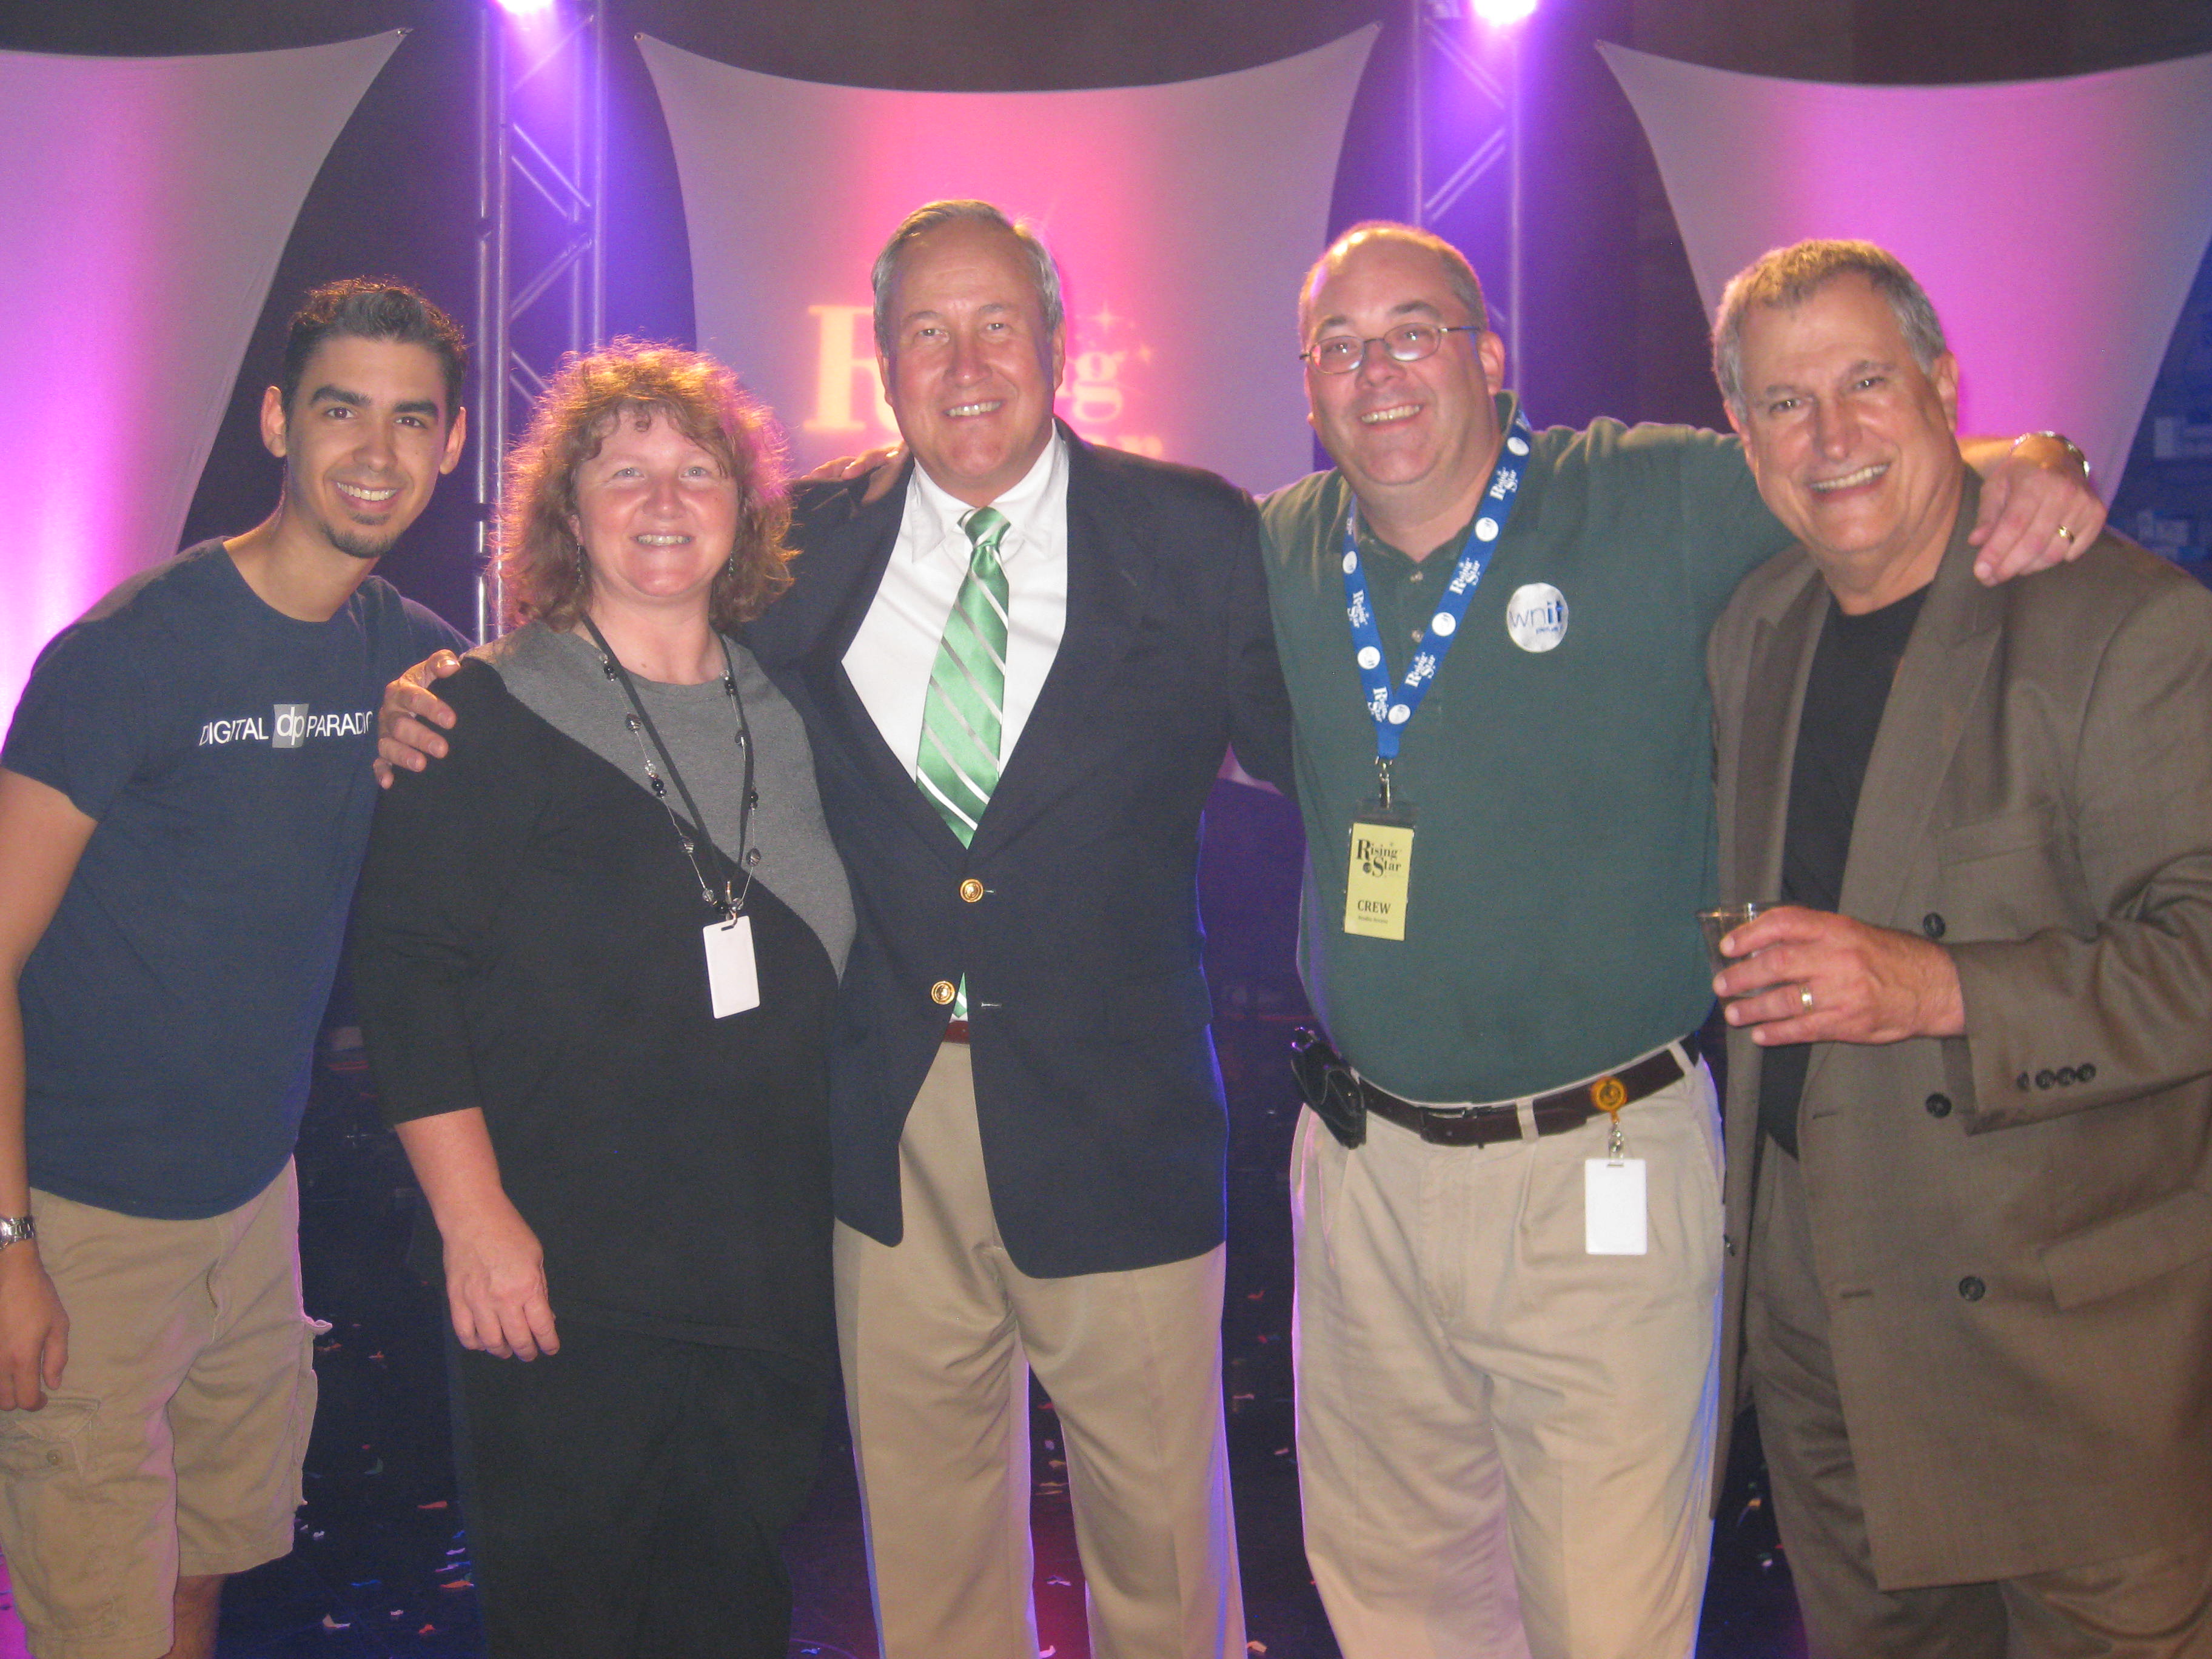 It's a wrap! After-party fun after taping the final episode of Michiana's Rising Star. L to R: Bryan Fellows (director), Brenda Bowyer (supervising producer), Mike Wargo (producer), Steve Funk (VP, Marketing), Angel Hernandez (executive producer).